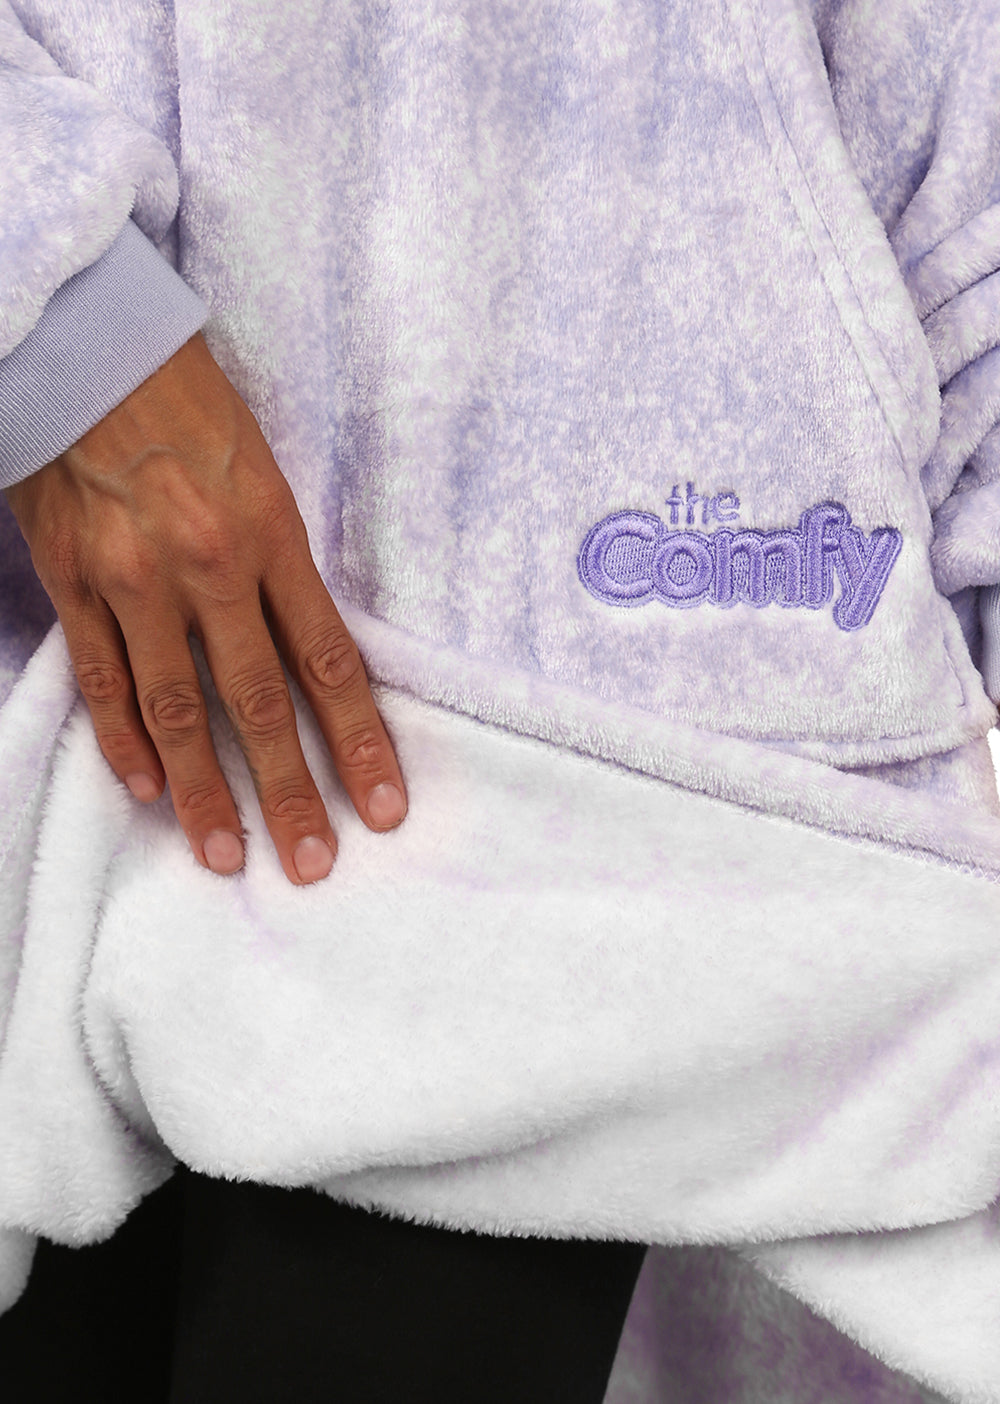 THE COMFY Dream Squishmallows Oversized Wearable Blanket Gifts for Women  and Kids, Ultrasoft Plush Light Microfiber Blankets Seen on Shark Tank